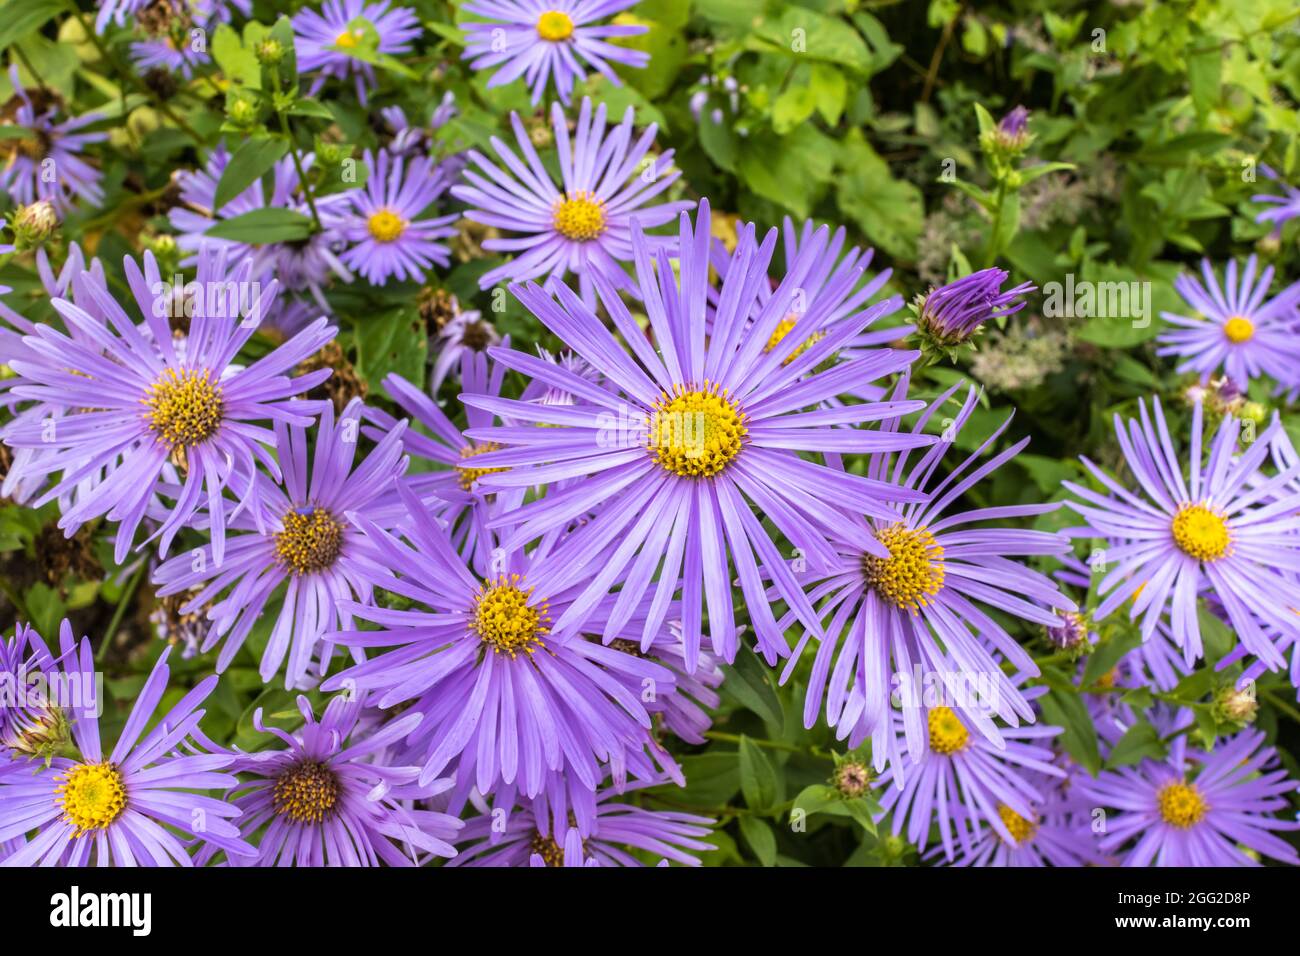 Aster Frikartii 'Monch' a lavender-blue herbaceous perennial in a herbaceous border. Stock Photo